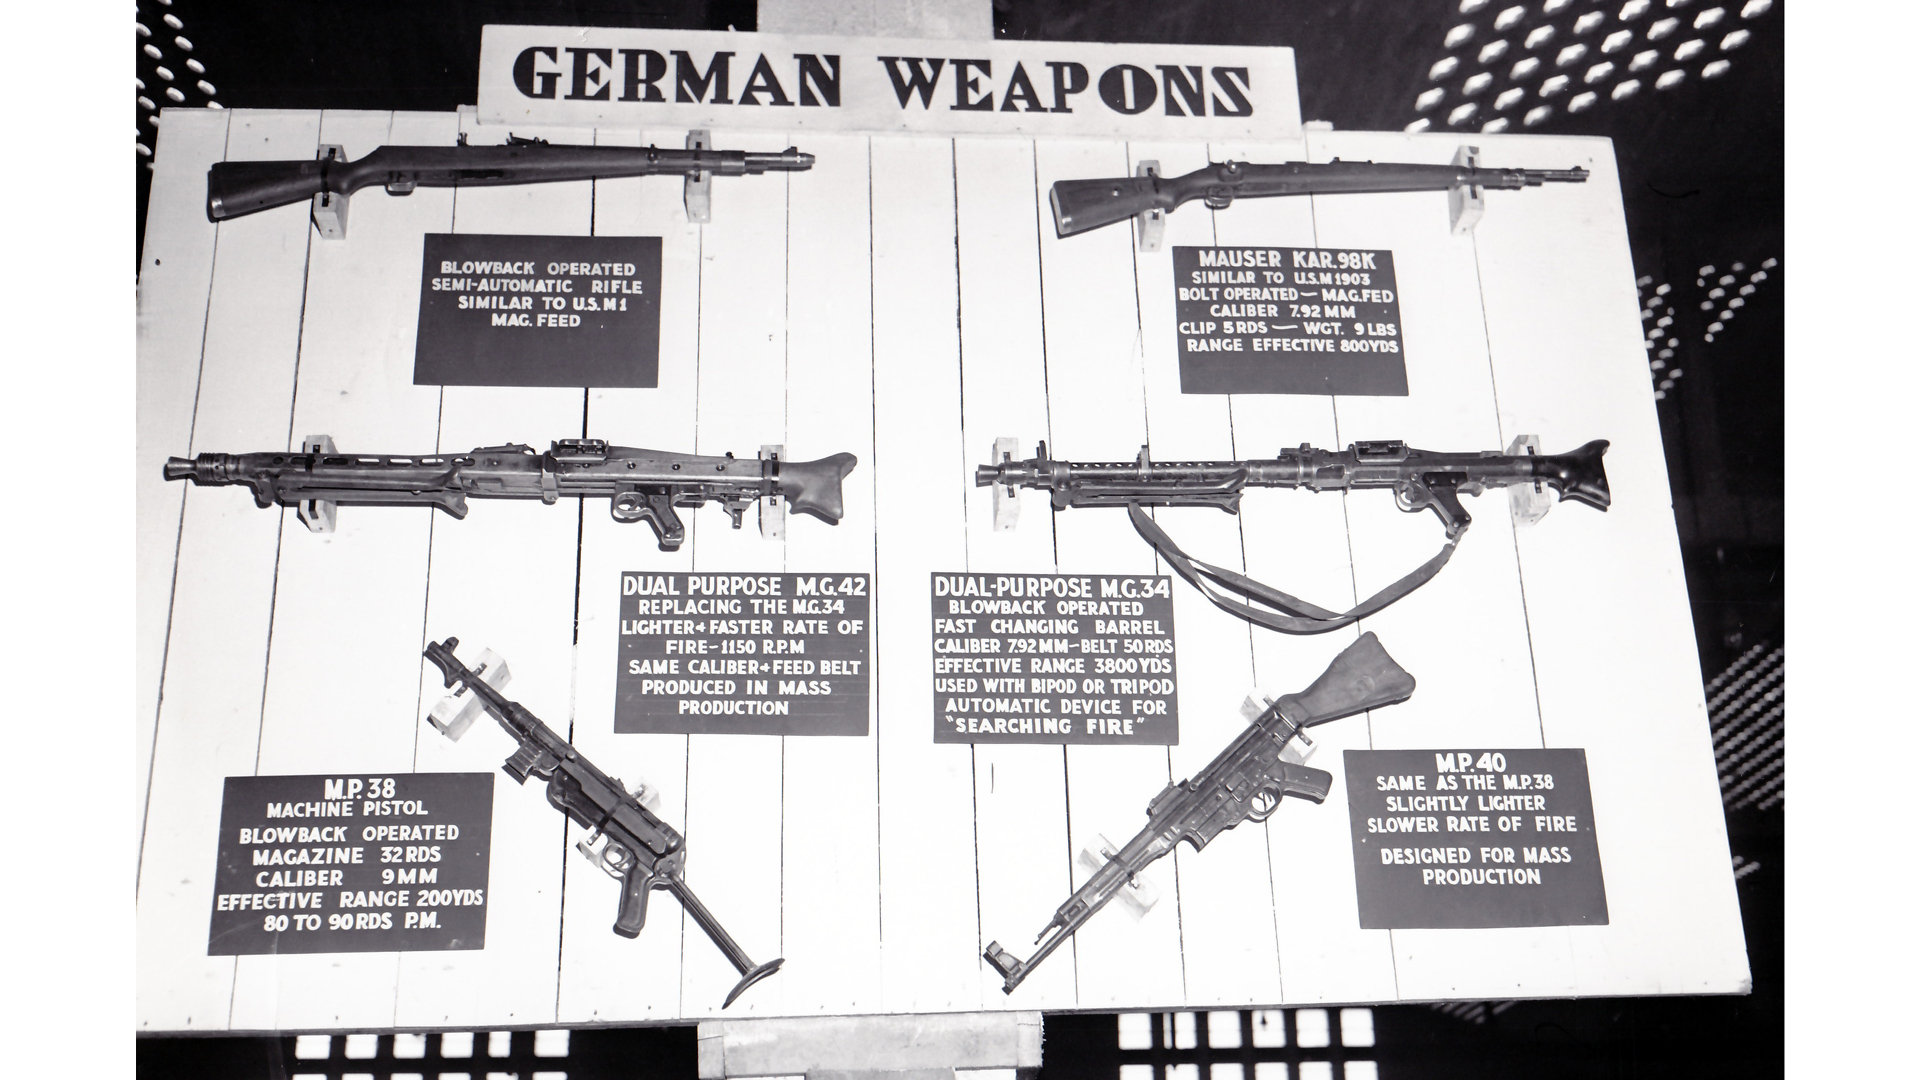 Full display of German Weapons in France, early 1945.